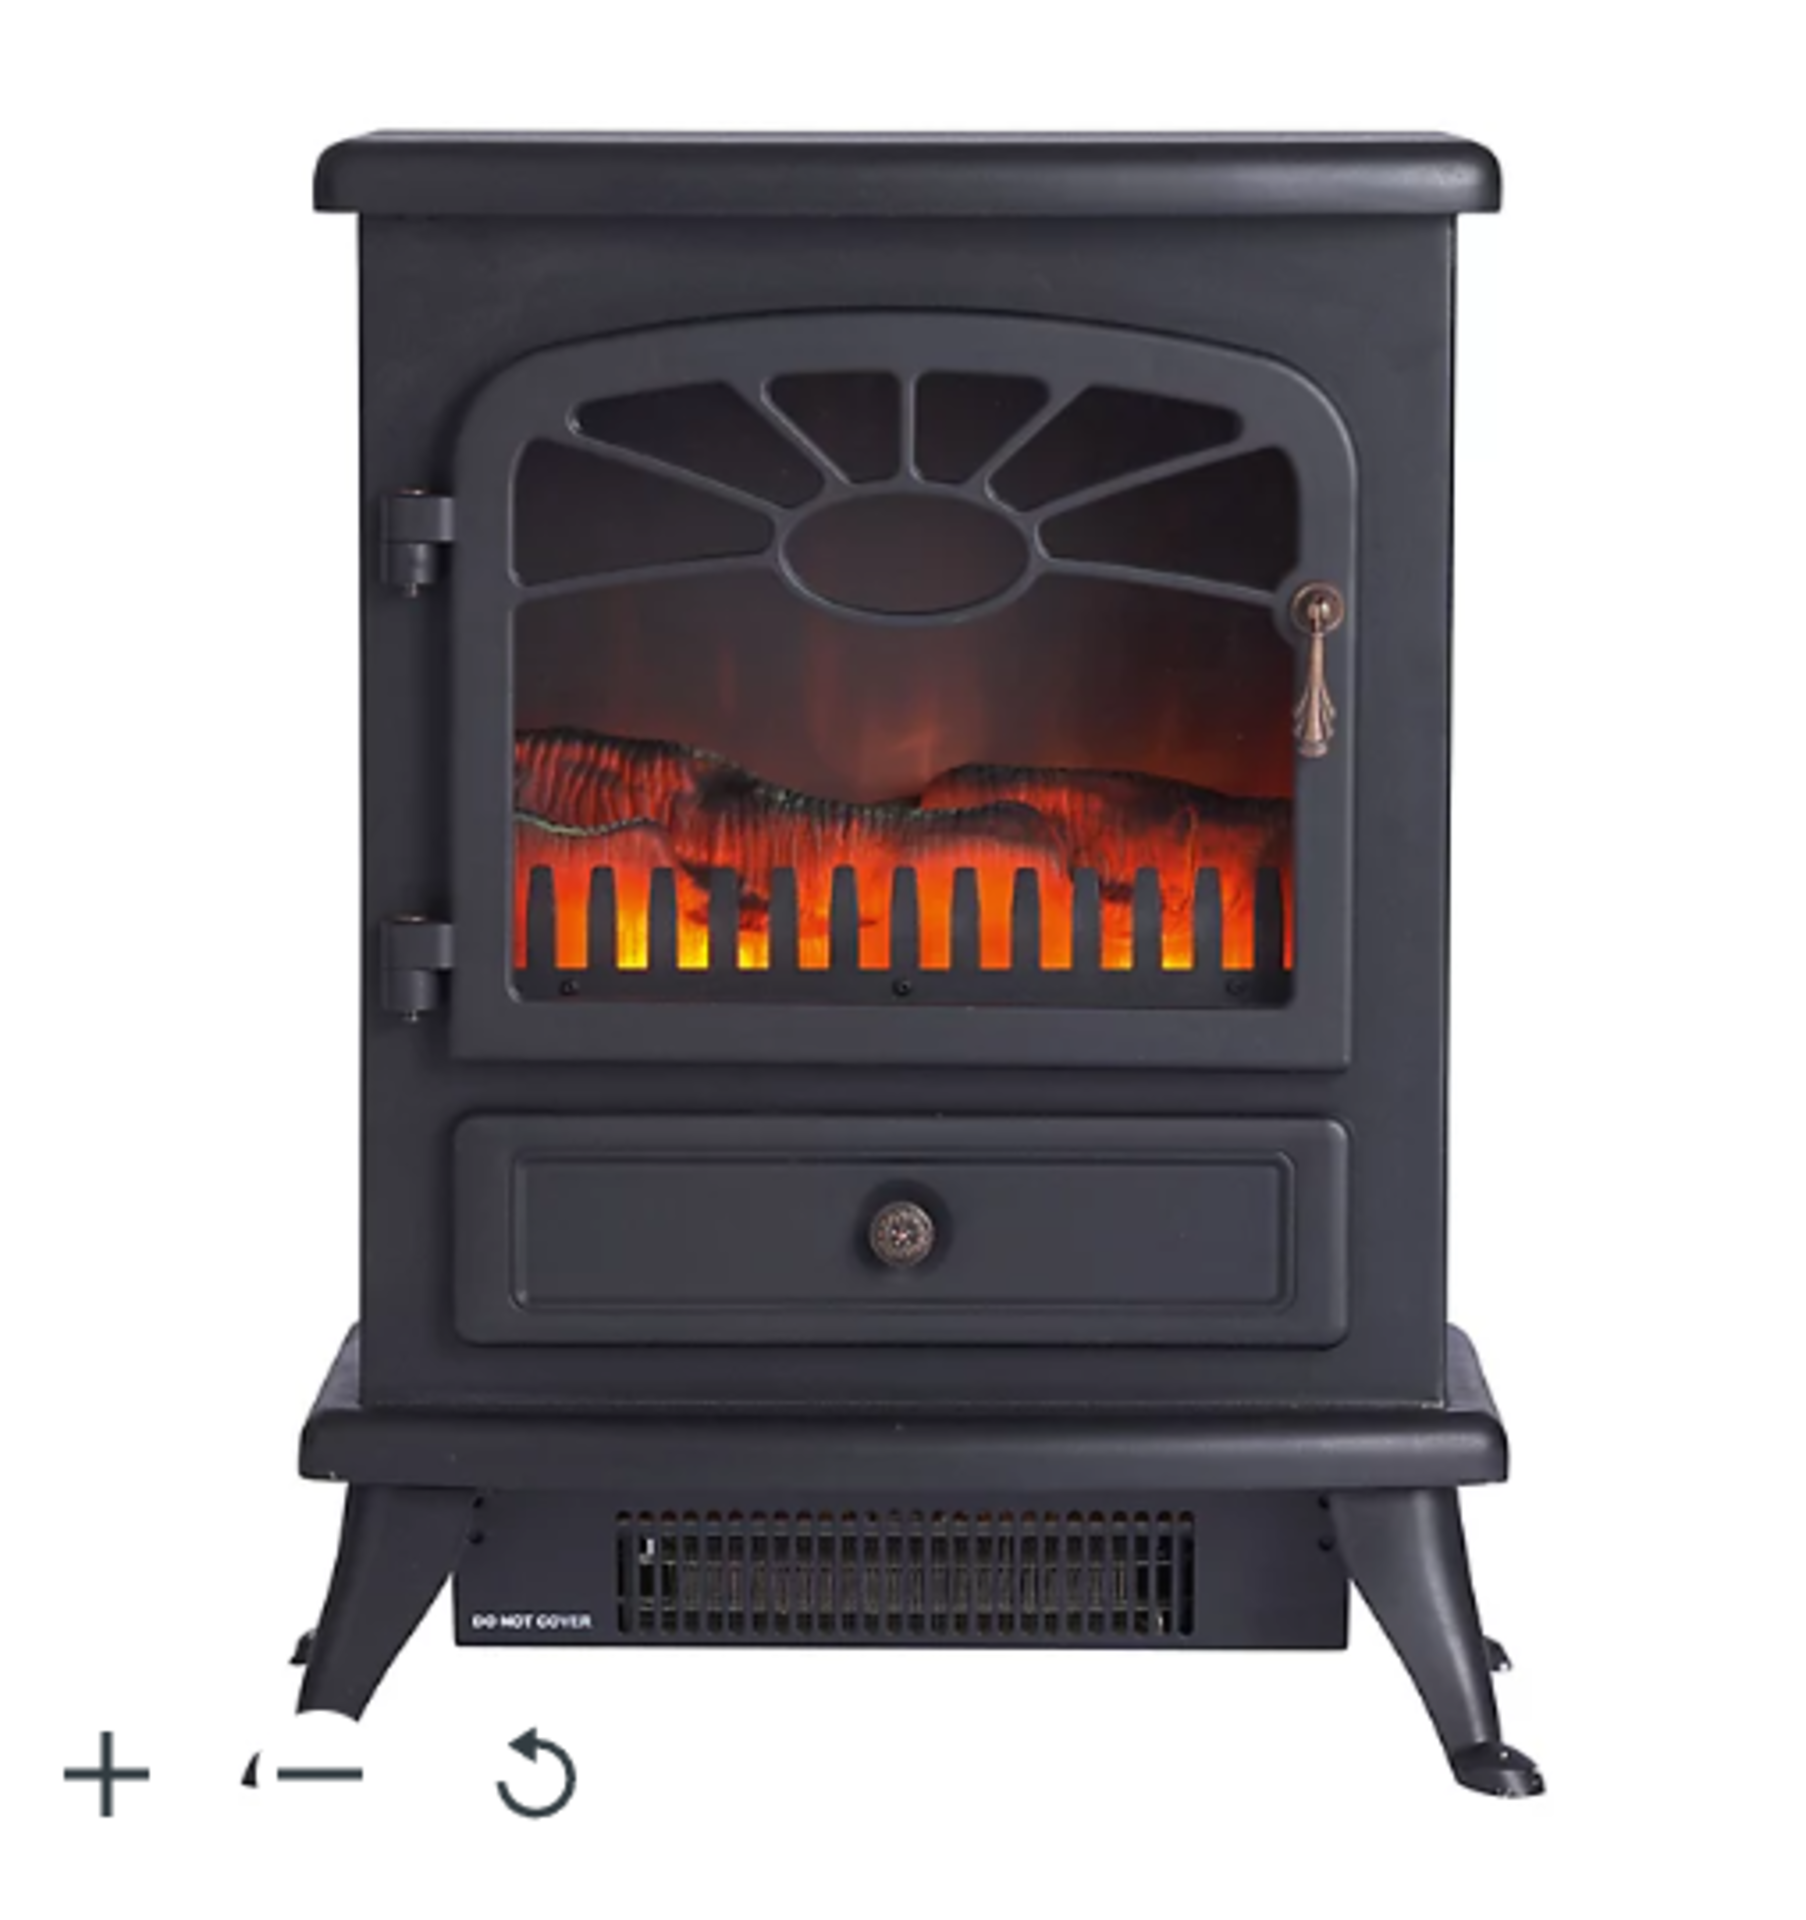 Focal Point ES 2000 Matt Black Electric Stove. - ER44. This electric fire features a flame effect